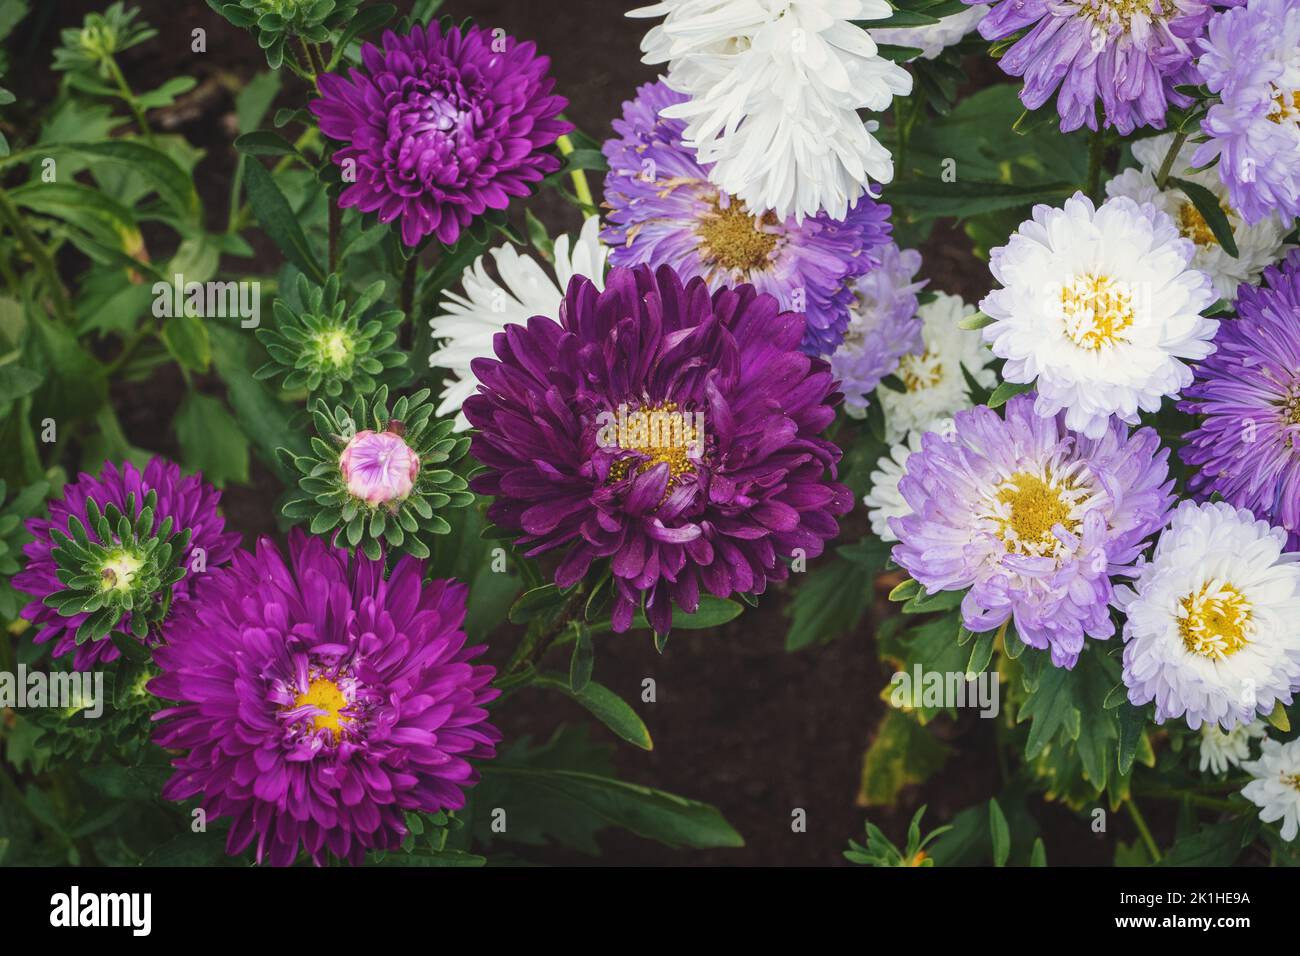 Purple and white Aster flowers growing in the garden, Callistephus chinensis blooming in autumn Stock Photo